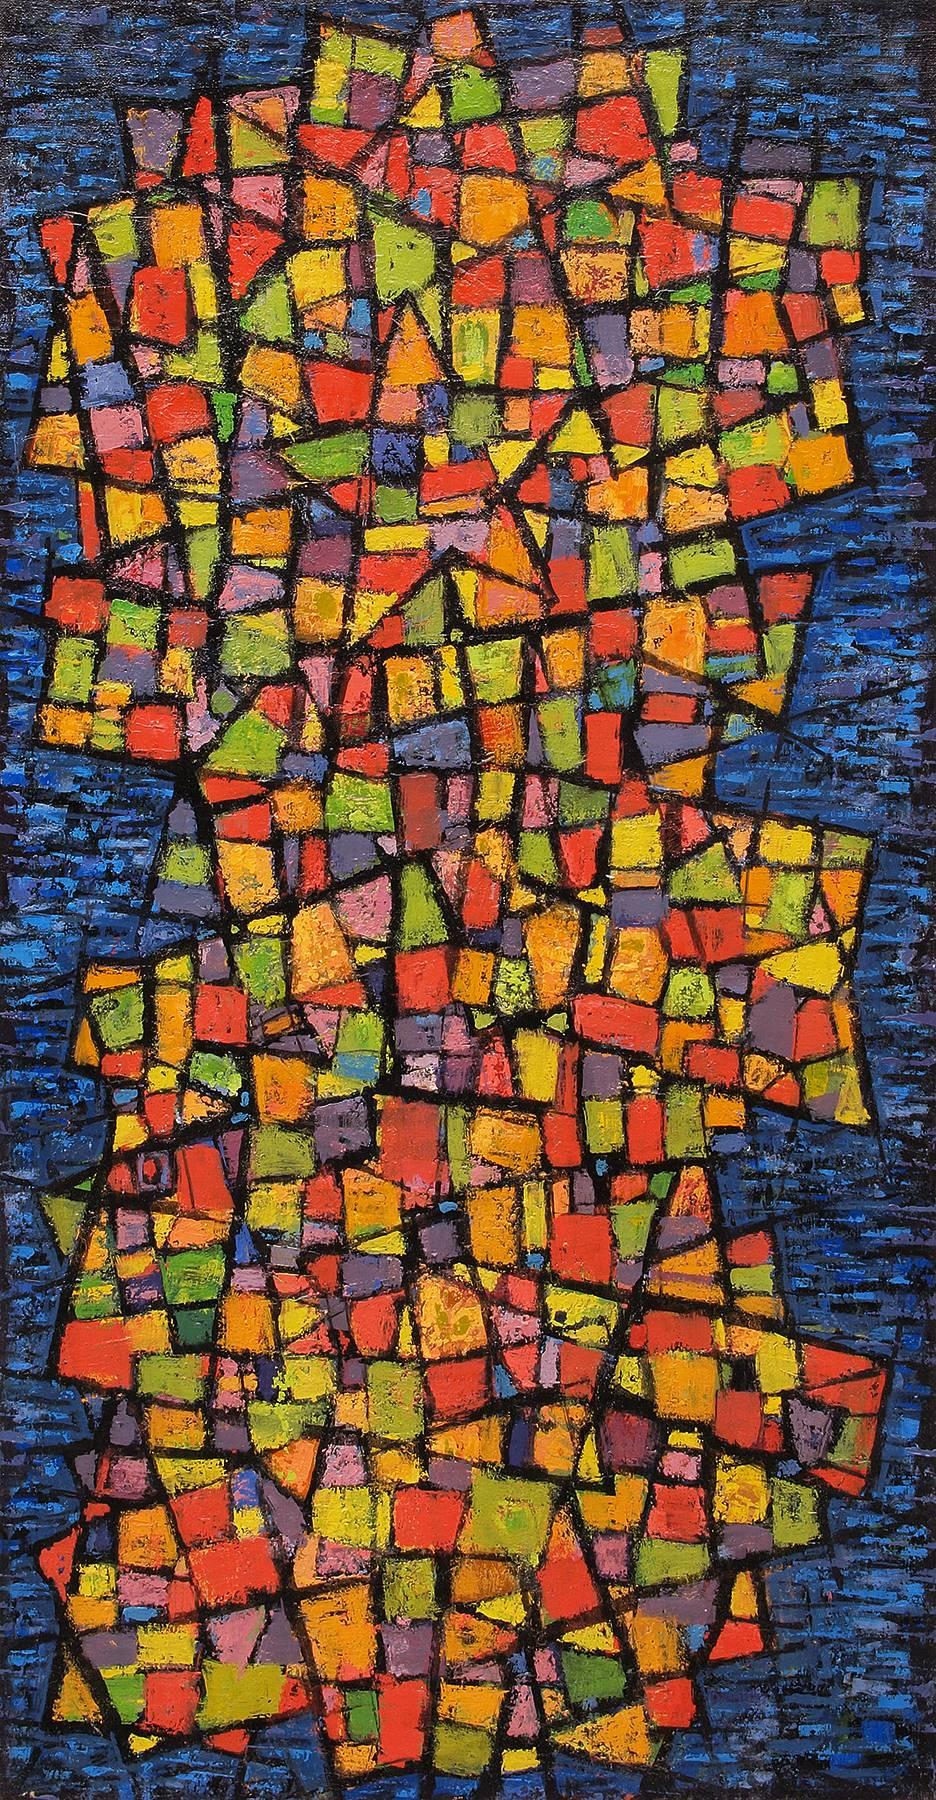 Painted Mosaic, Geometric Abstract: Blue, Golden Yellow, Orange, Green, Purple - Painting by Paul Kauver Smith